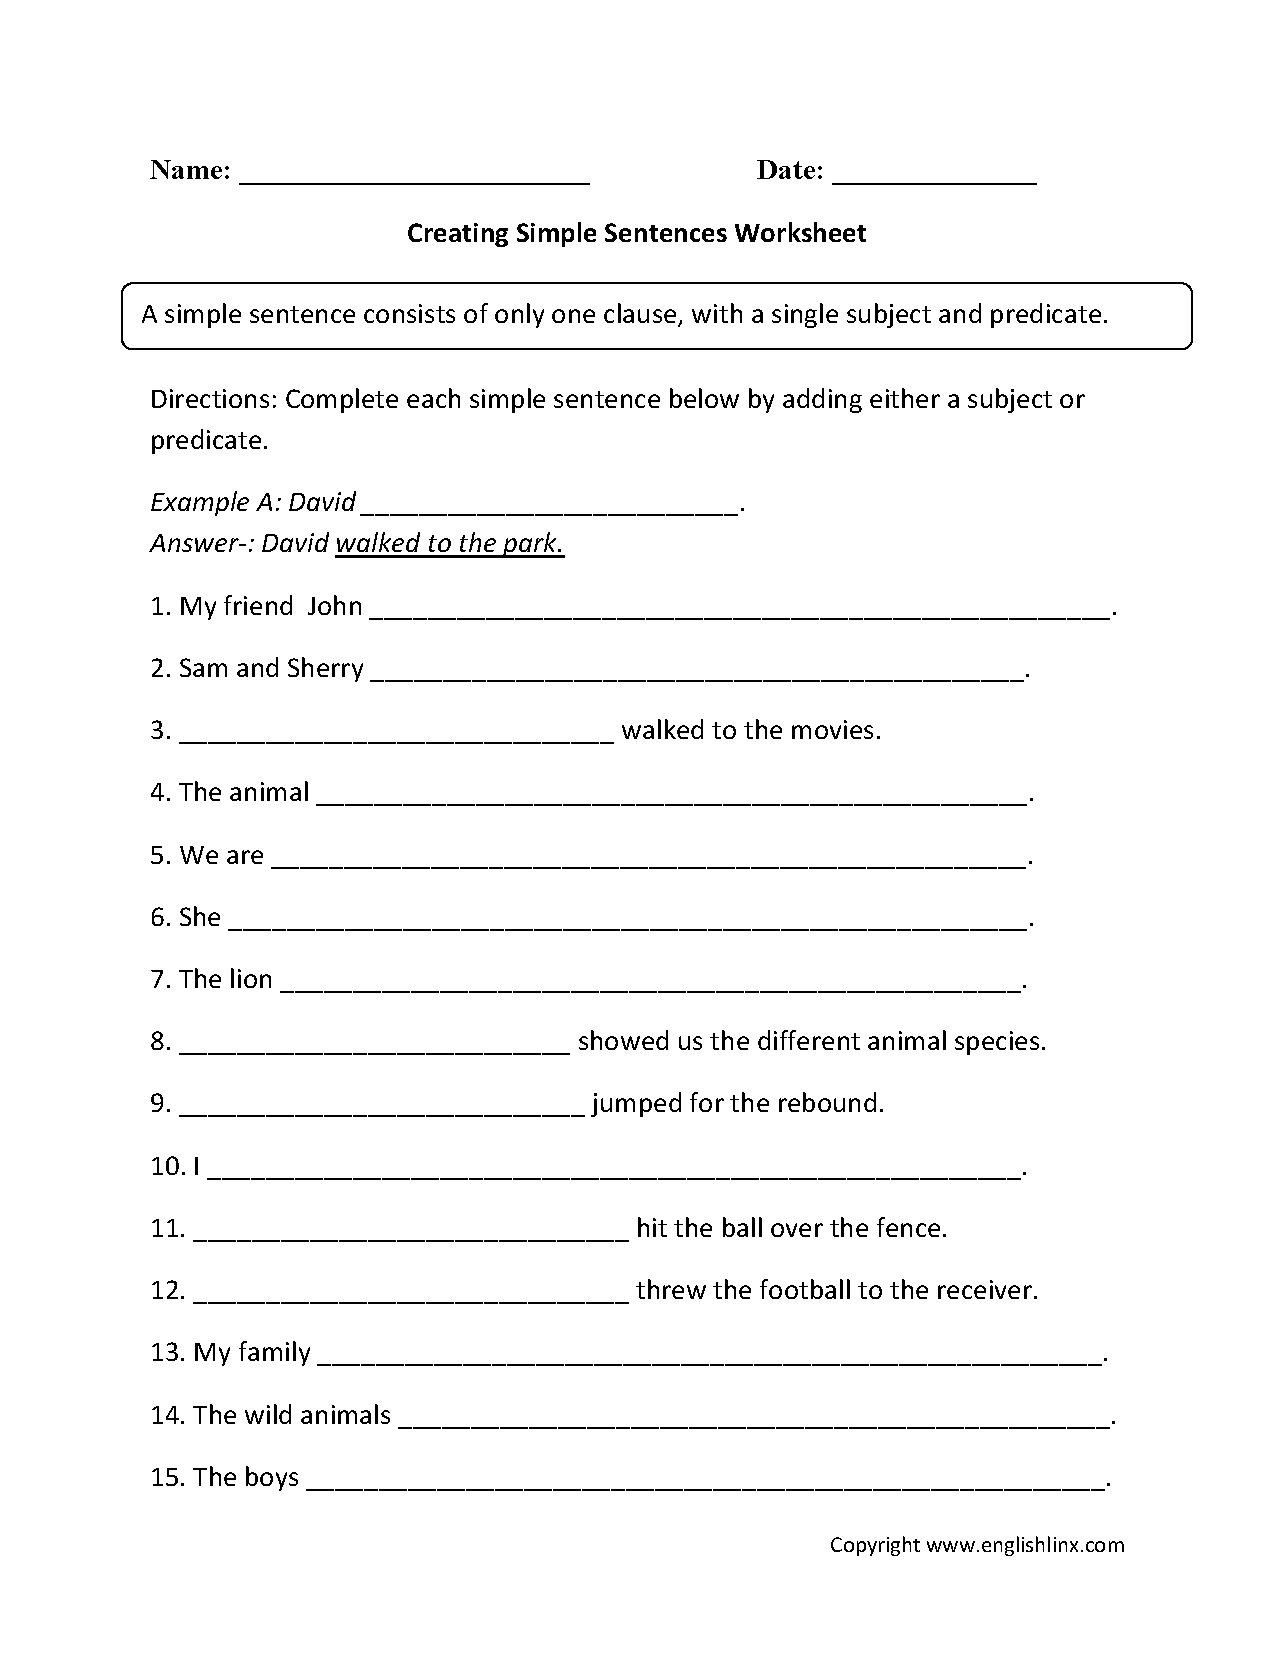 Worksheet On Kinds Of Sentences According To Structure